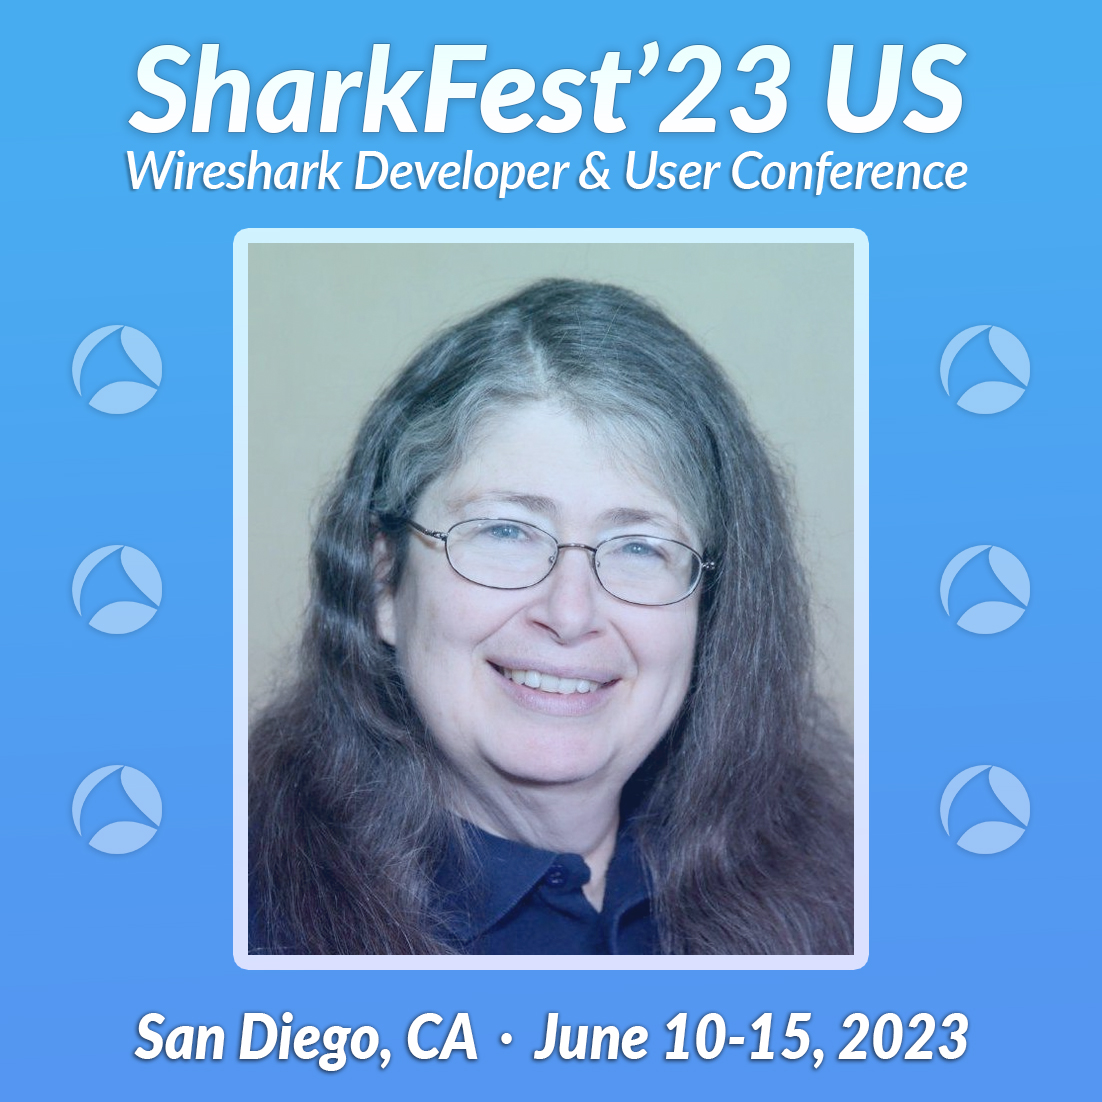 #SharkFest'23 US is coming up soon, and we're so excited to have #RadiaPerlman as a featured guest and keynote speaker! 

Sign up today and gain valuable skills while learning #Wireshark.

sharkfest.wireshark.org

@WiresharkNews #LearnWireshark #sf23us